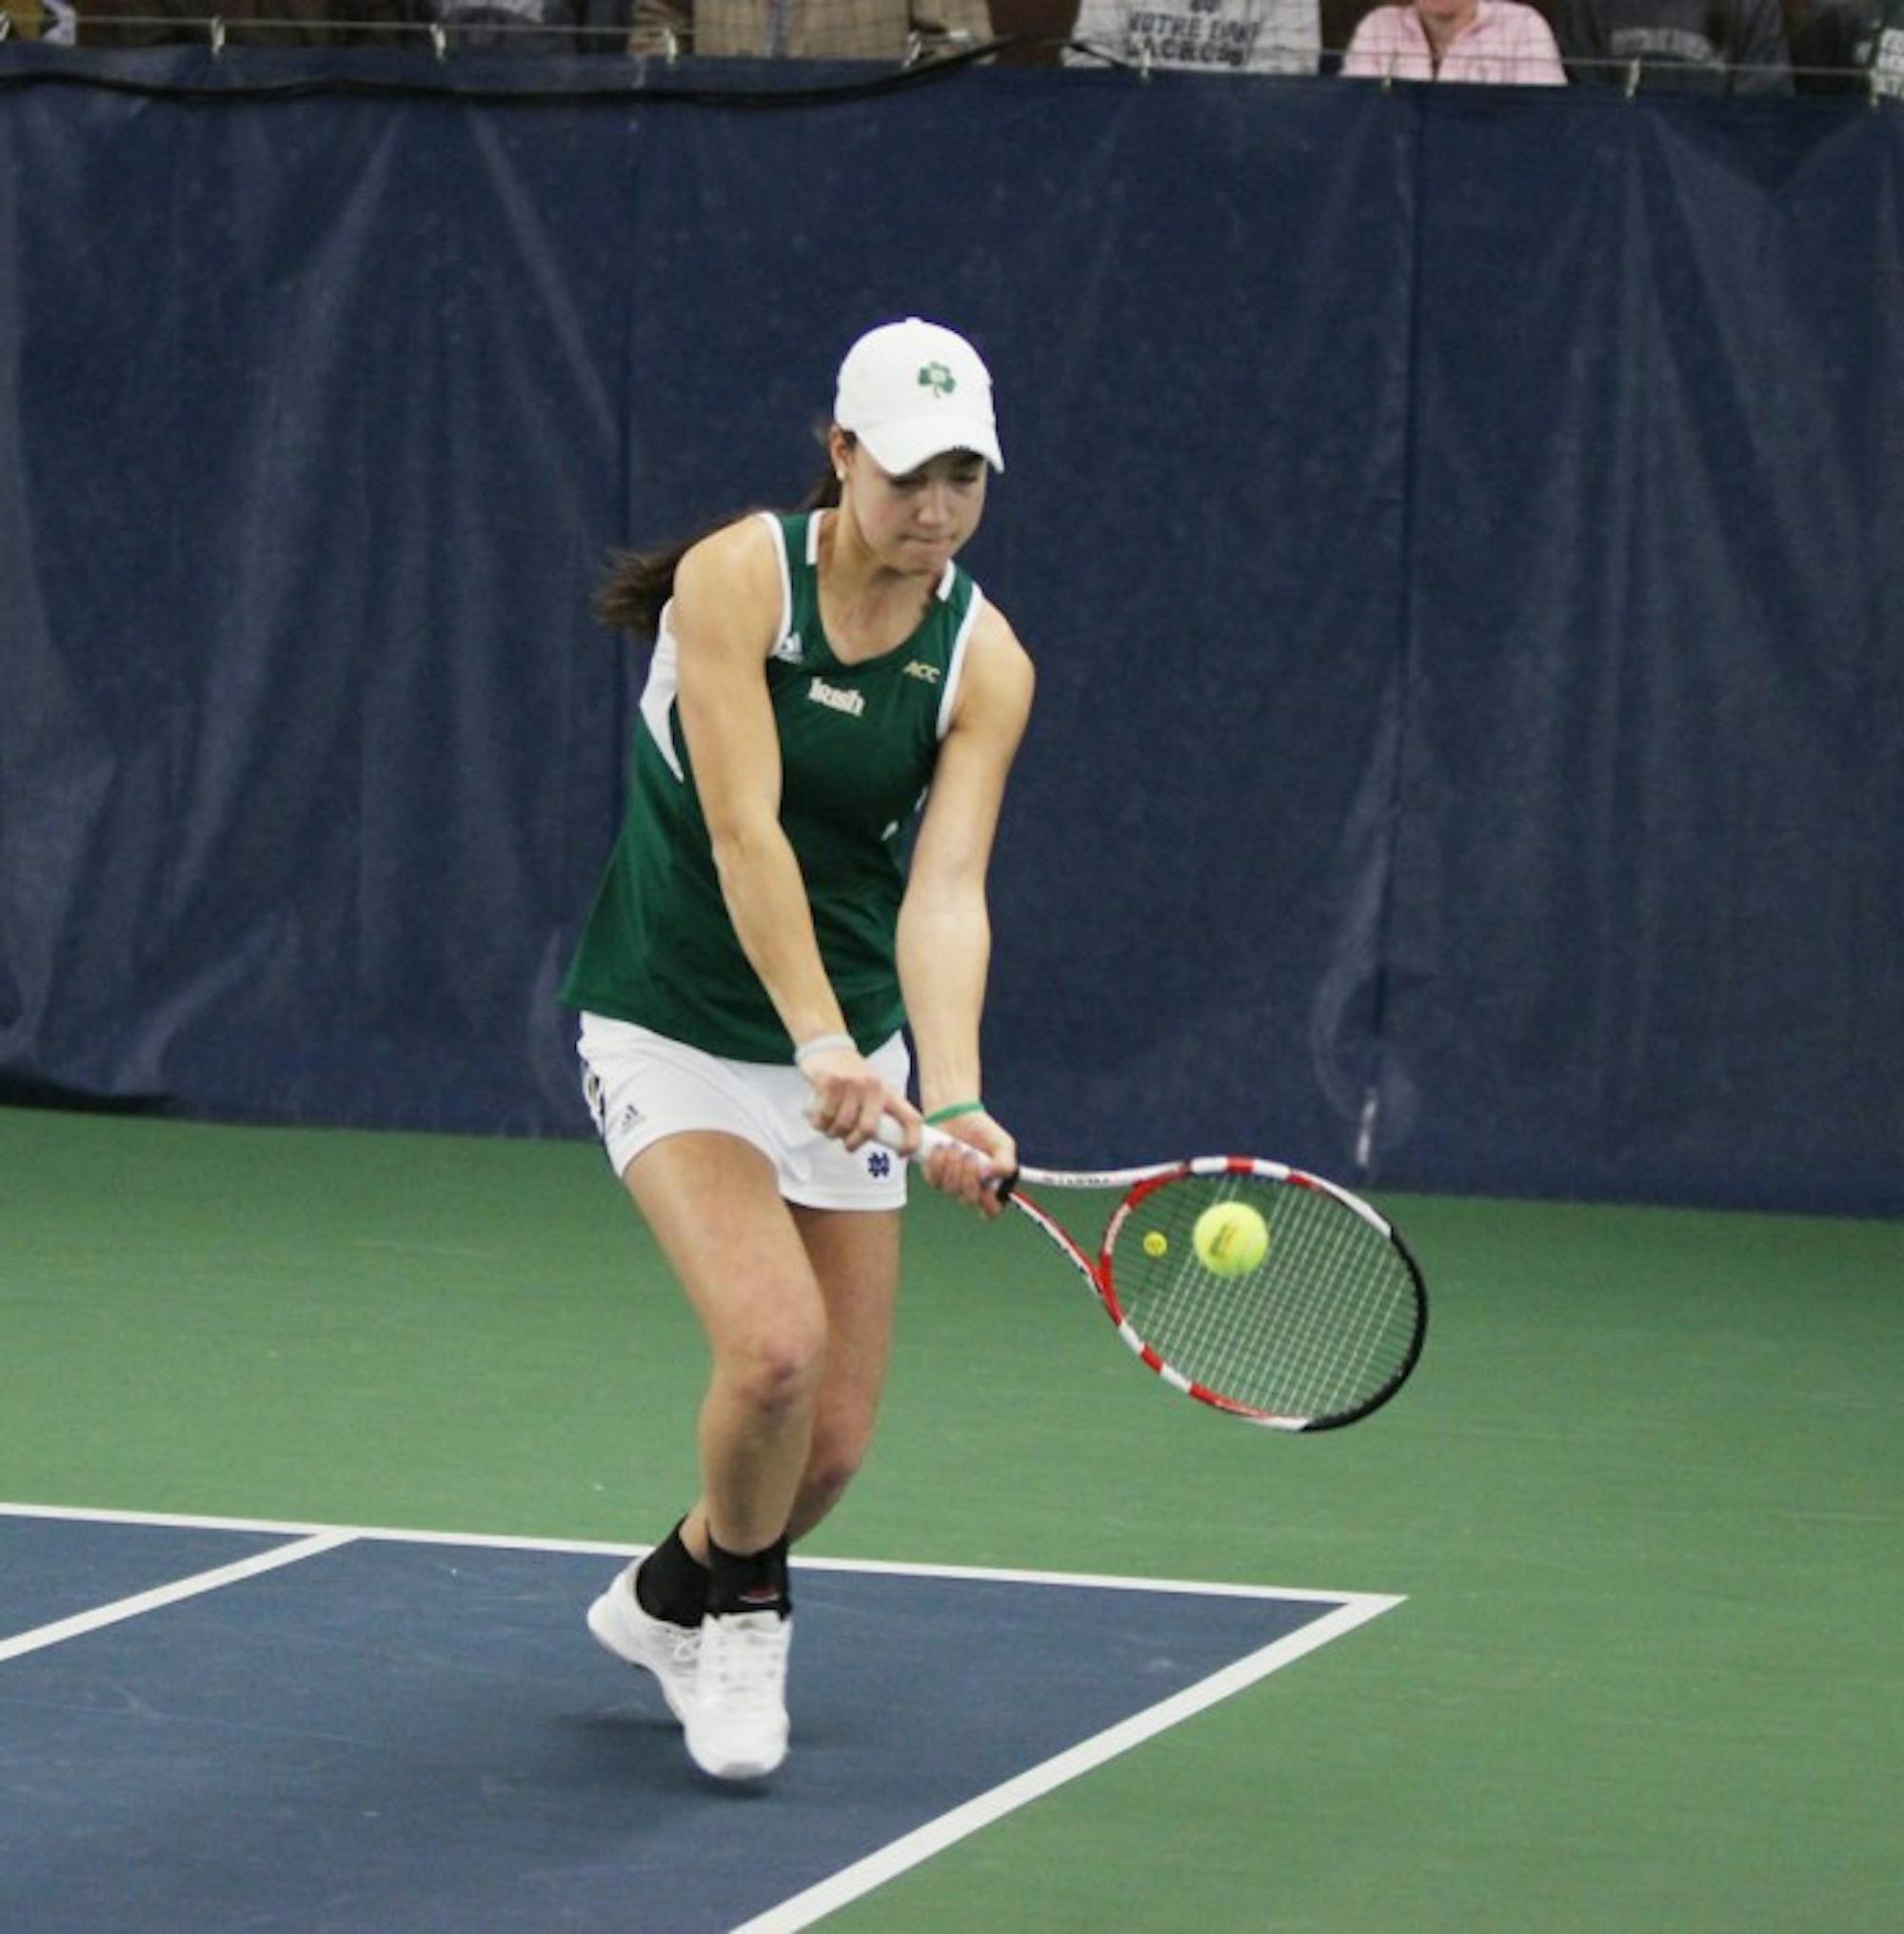 Notre Dame junior Quinn Gleason, who occasionally partnered with sophomore Jane Fennelly in doubles play in the past, volleys the ball during a 4-3 loss to Georgia Tech in Eck Tennis Center on Feb. 21, 2014.